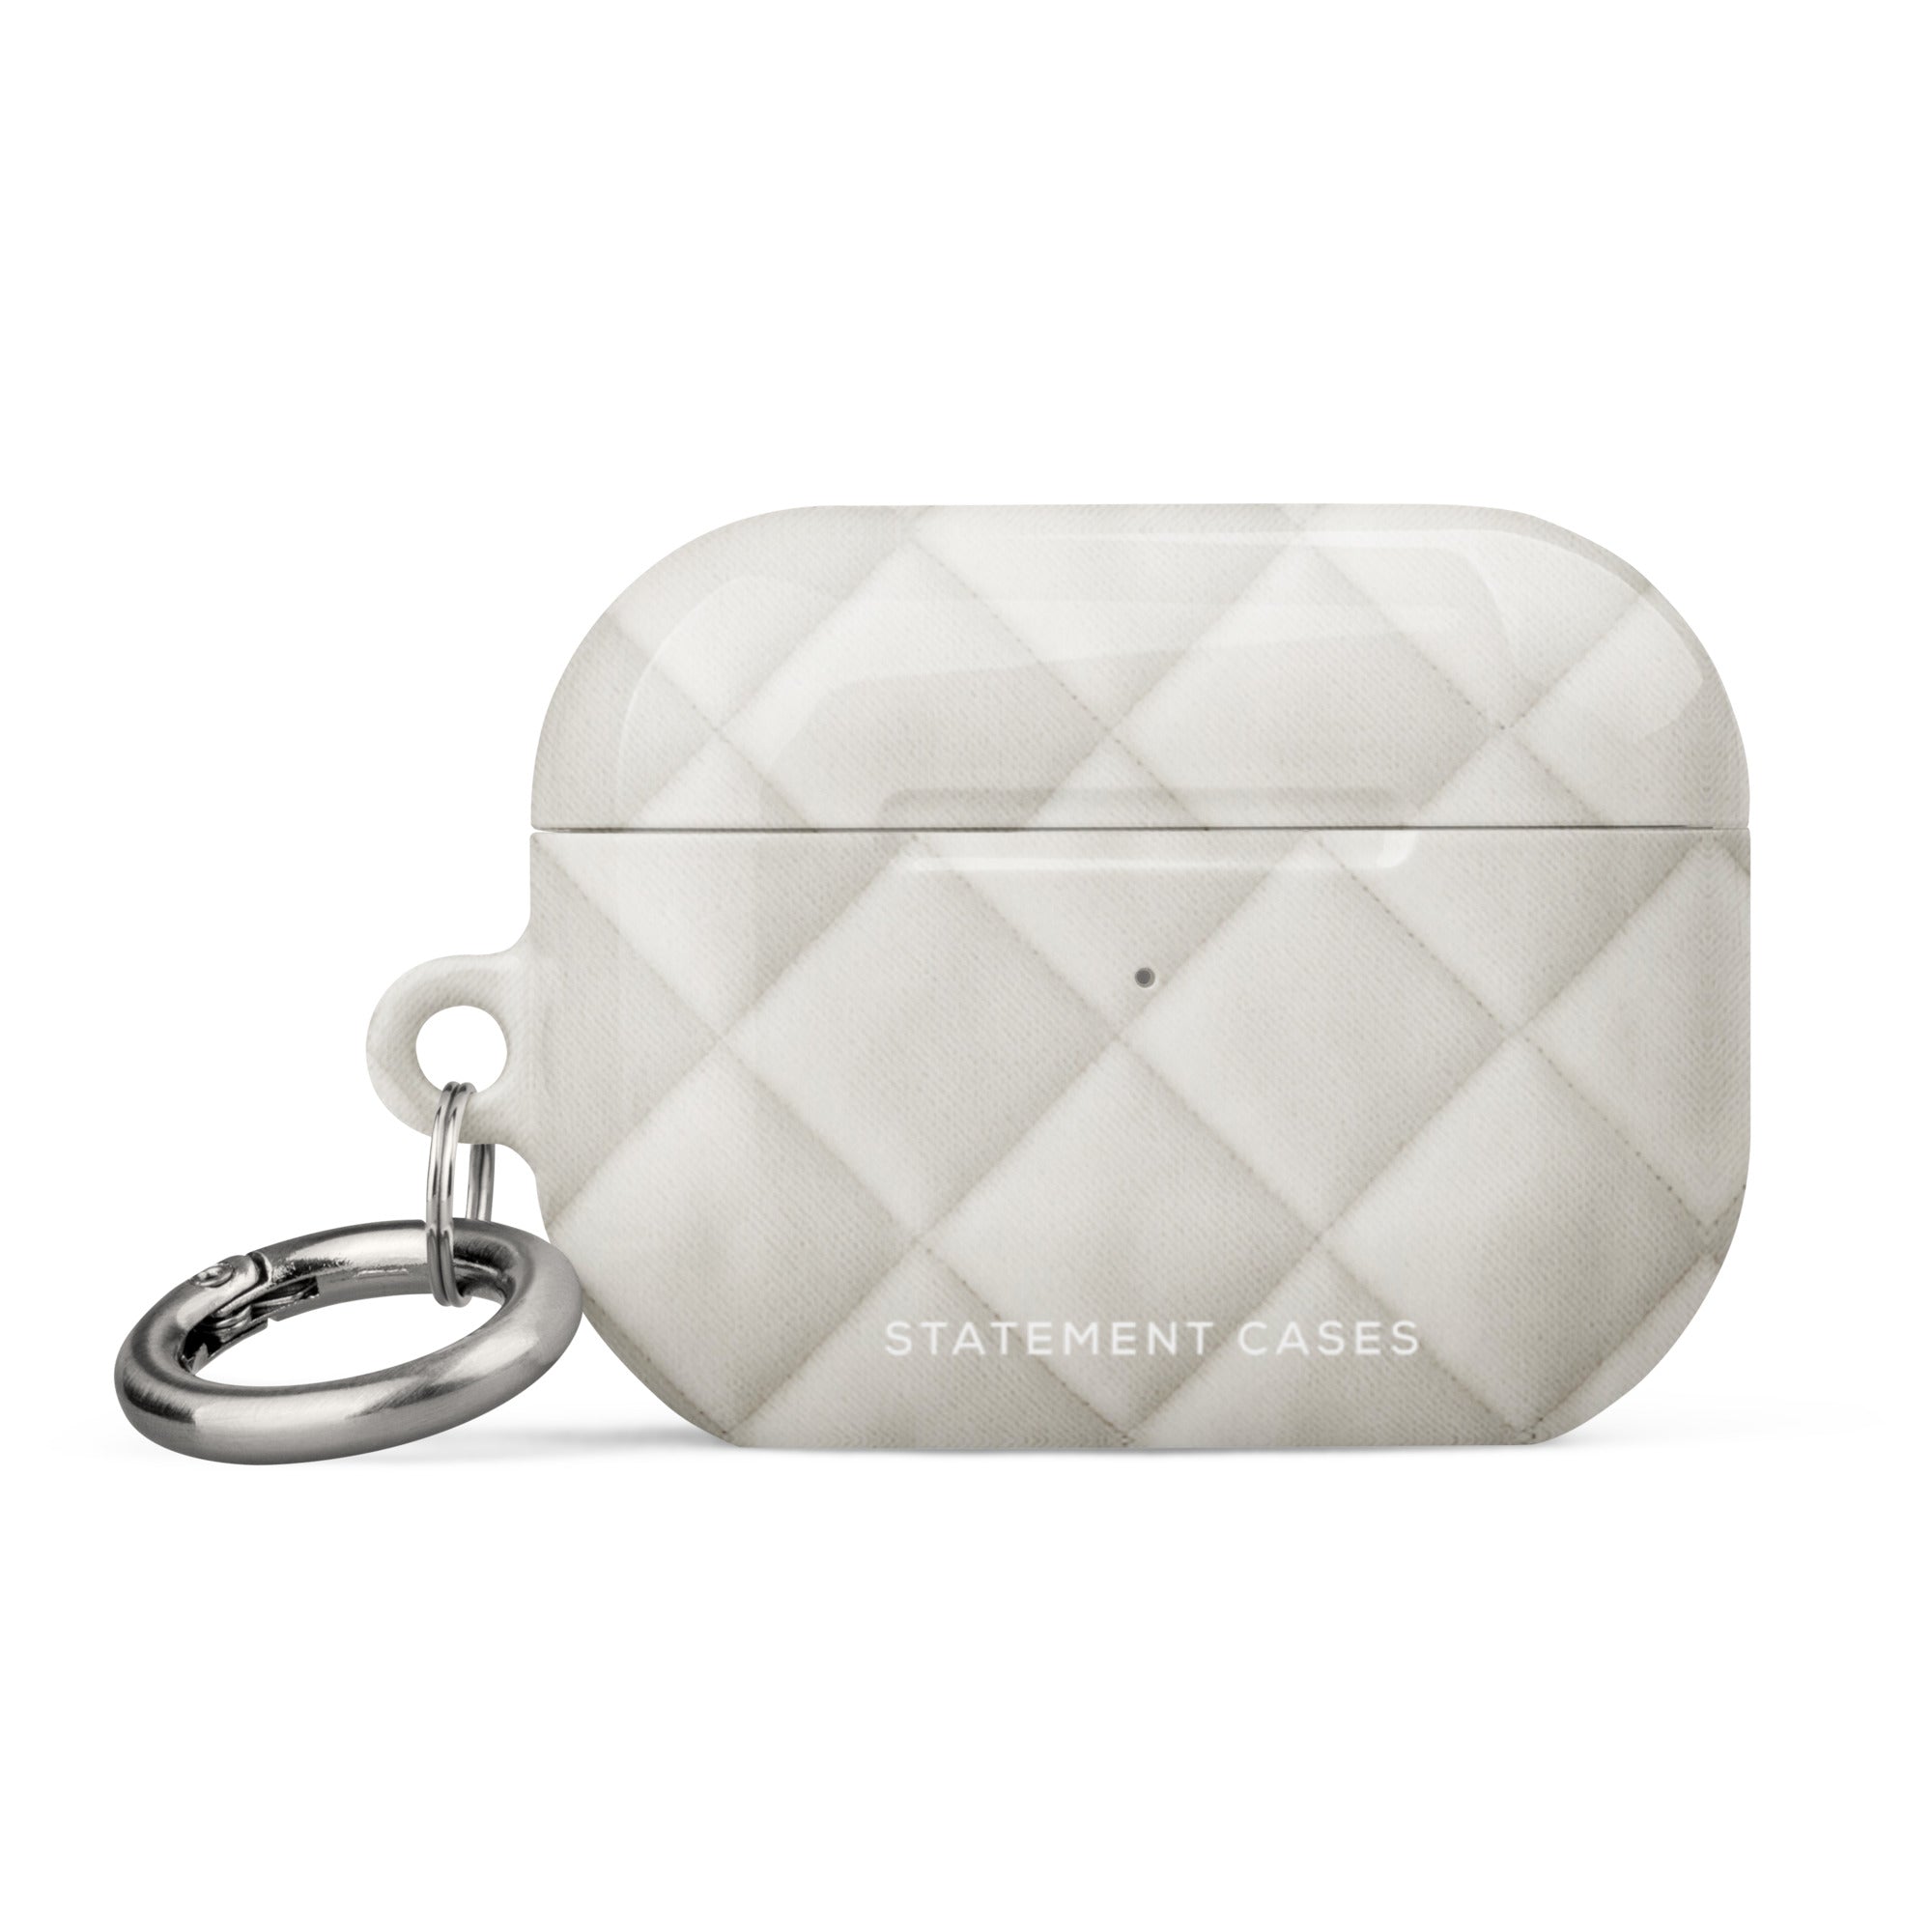 A white, quilted Quilted Delight for AirPods Pro Gen 2 with a silver keyring and metal carabiner attached on the left side. The impact-absorbing material features a diamond pattern and the words "Statement Cases" printed on the bottom front.